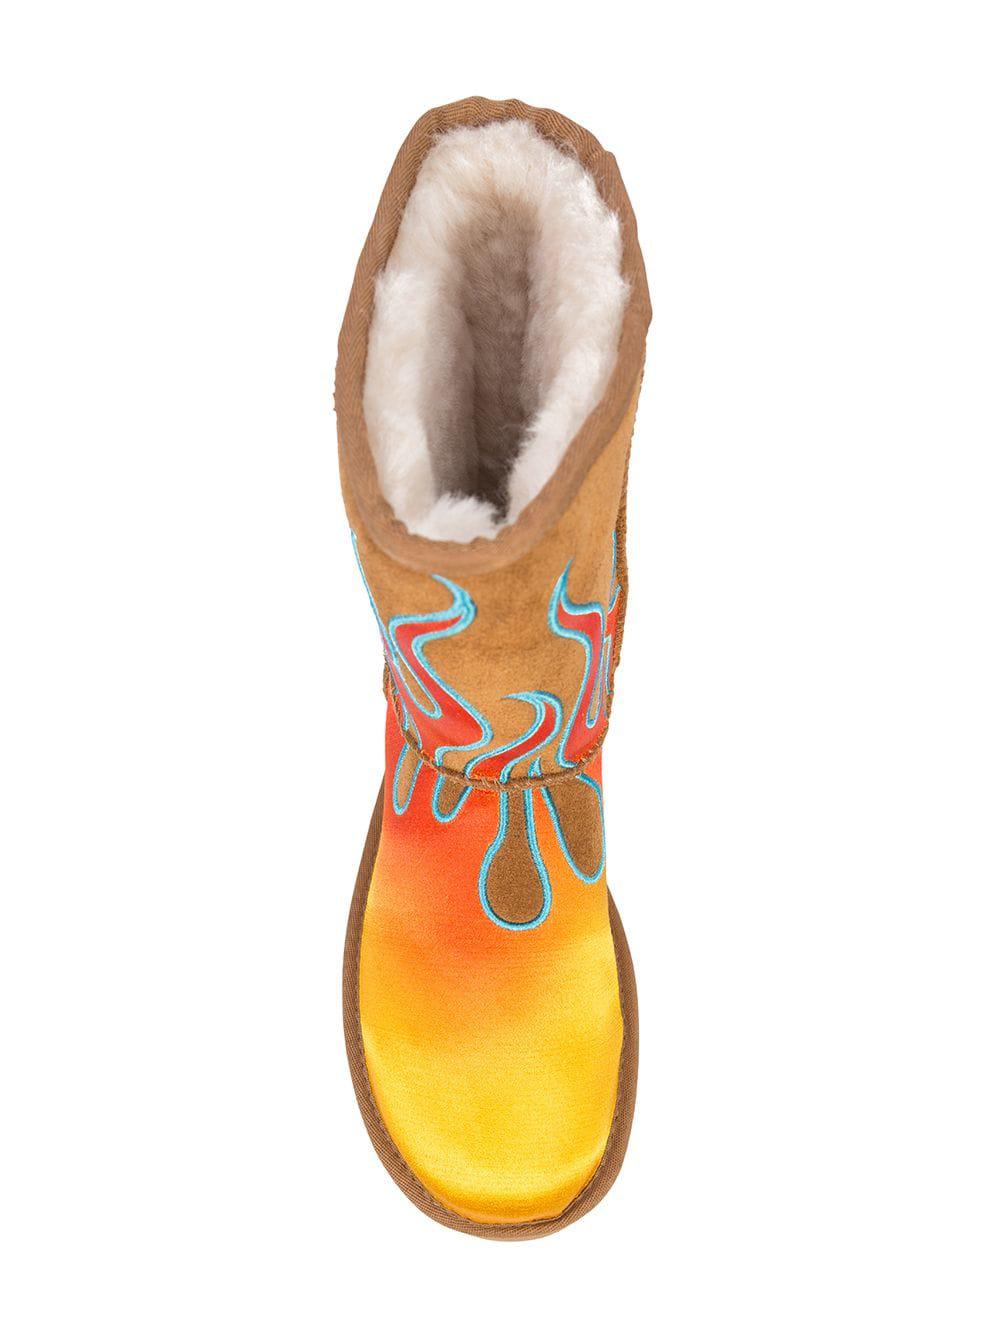 Jeremy Scott UGG X Flame Boots in Brown - Lyst